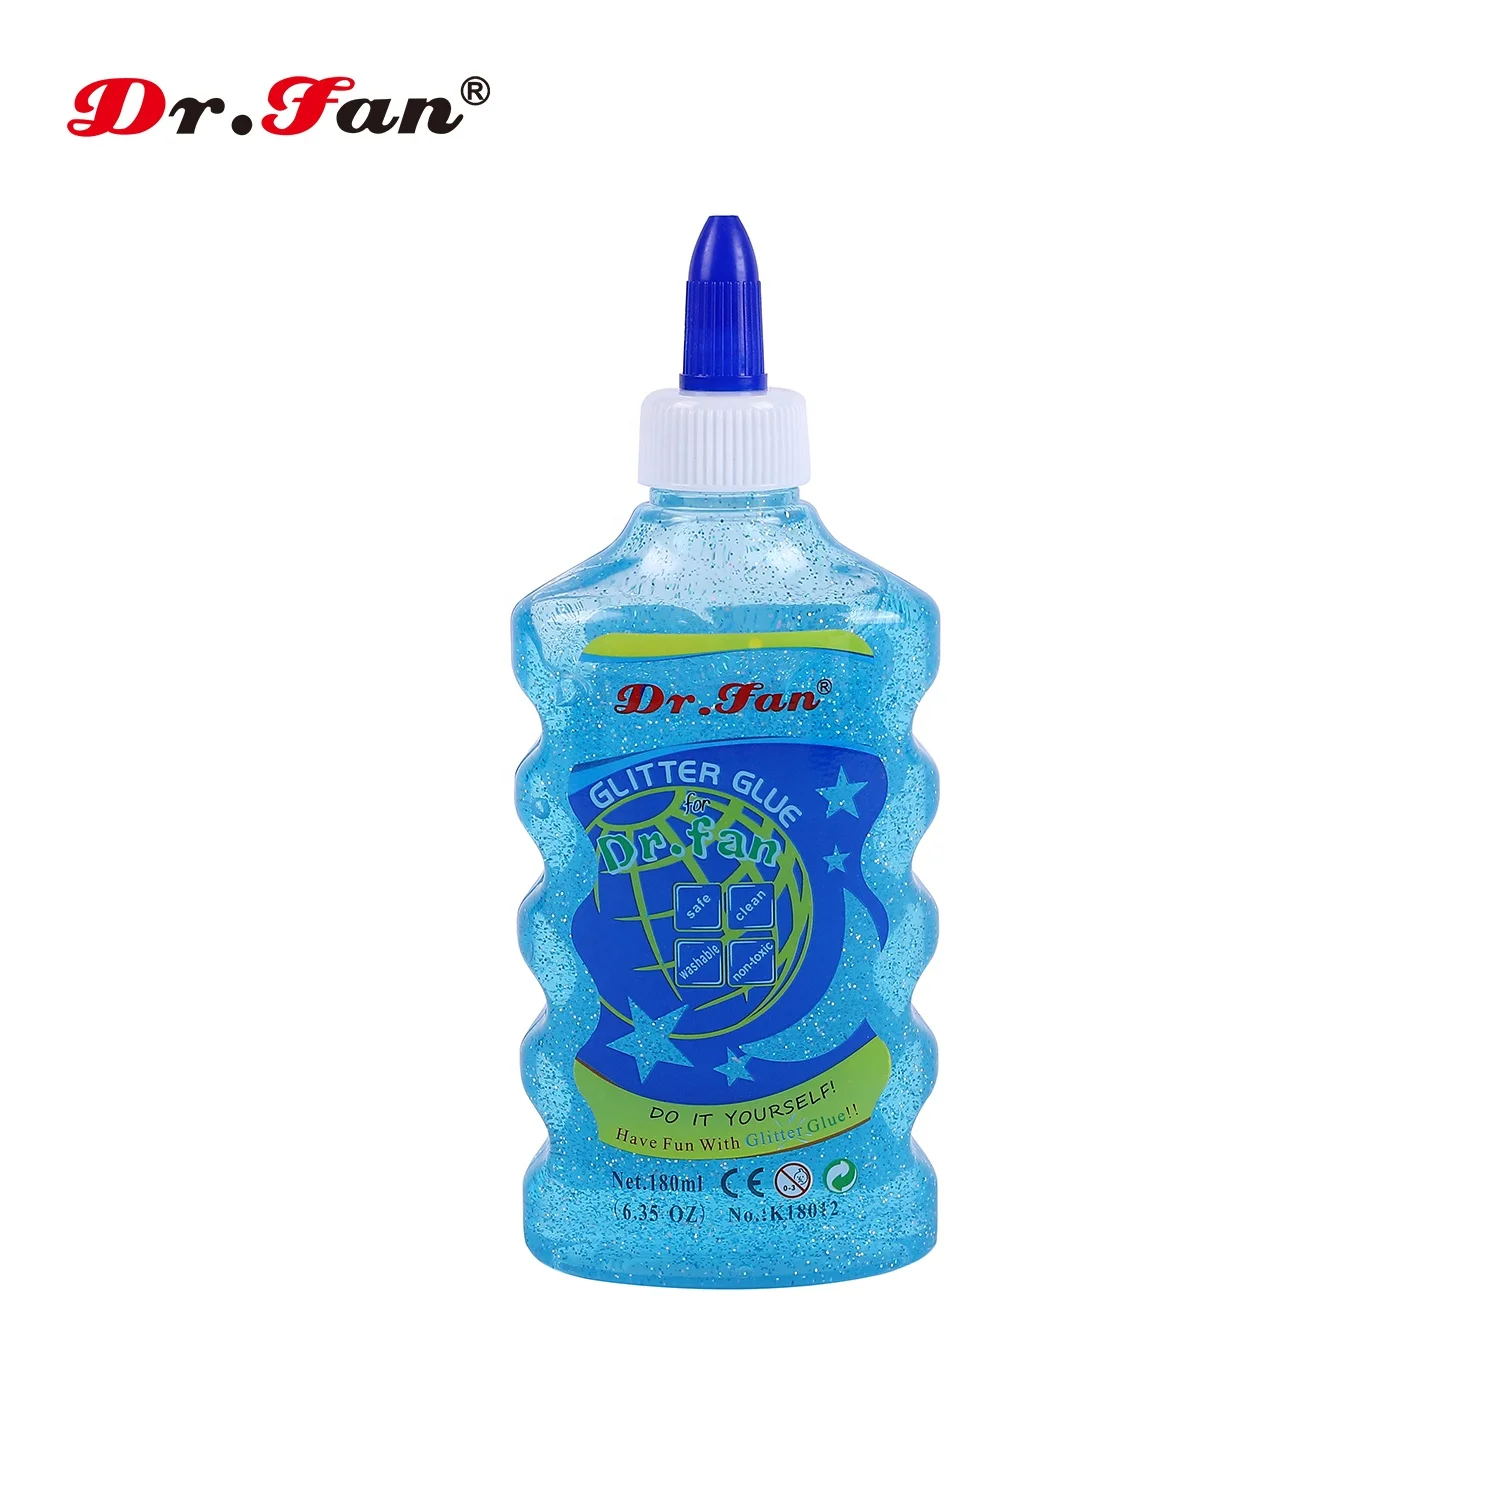 
180ml drfan Glitter Glue for slime Crafting DIY OEM Bottle Key Packing Holiday Package Feature Decoration 